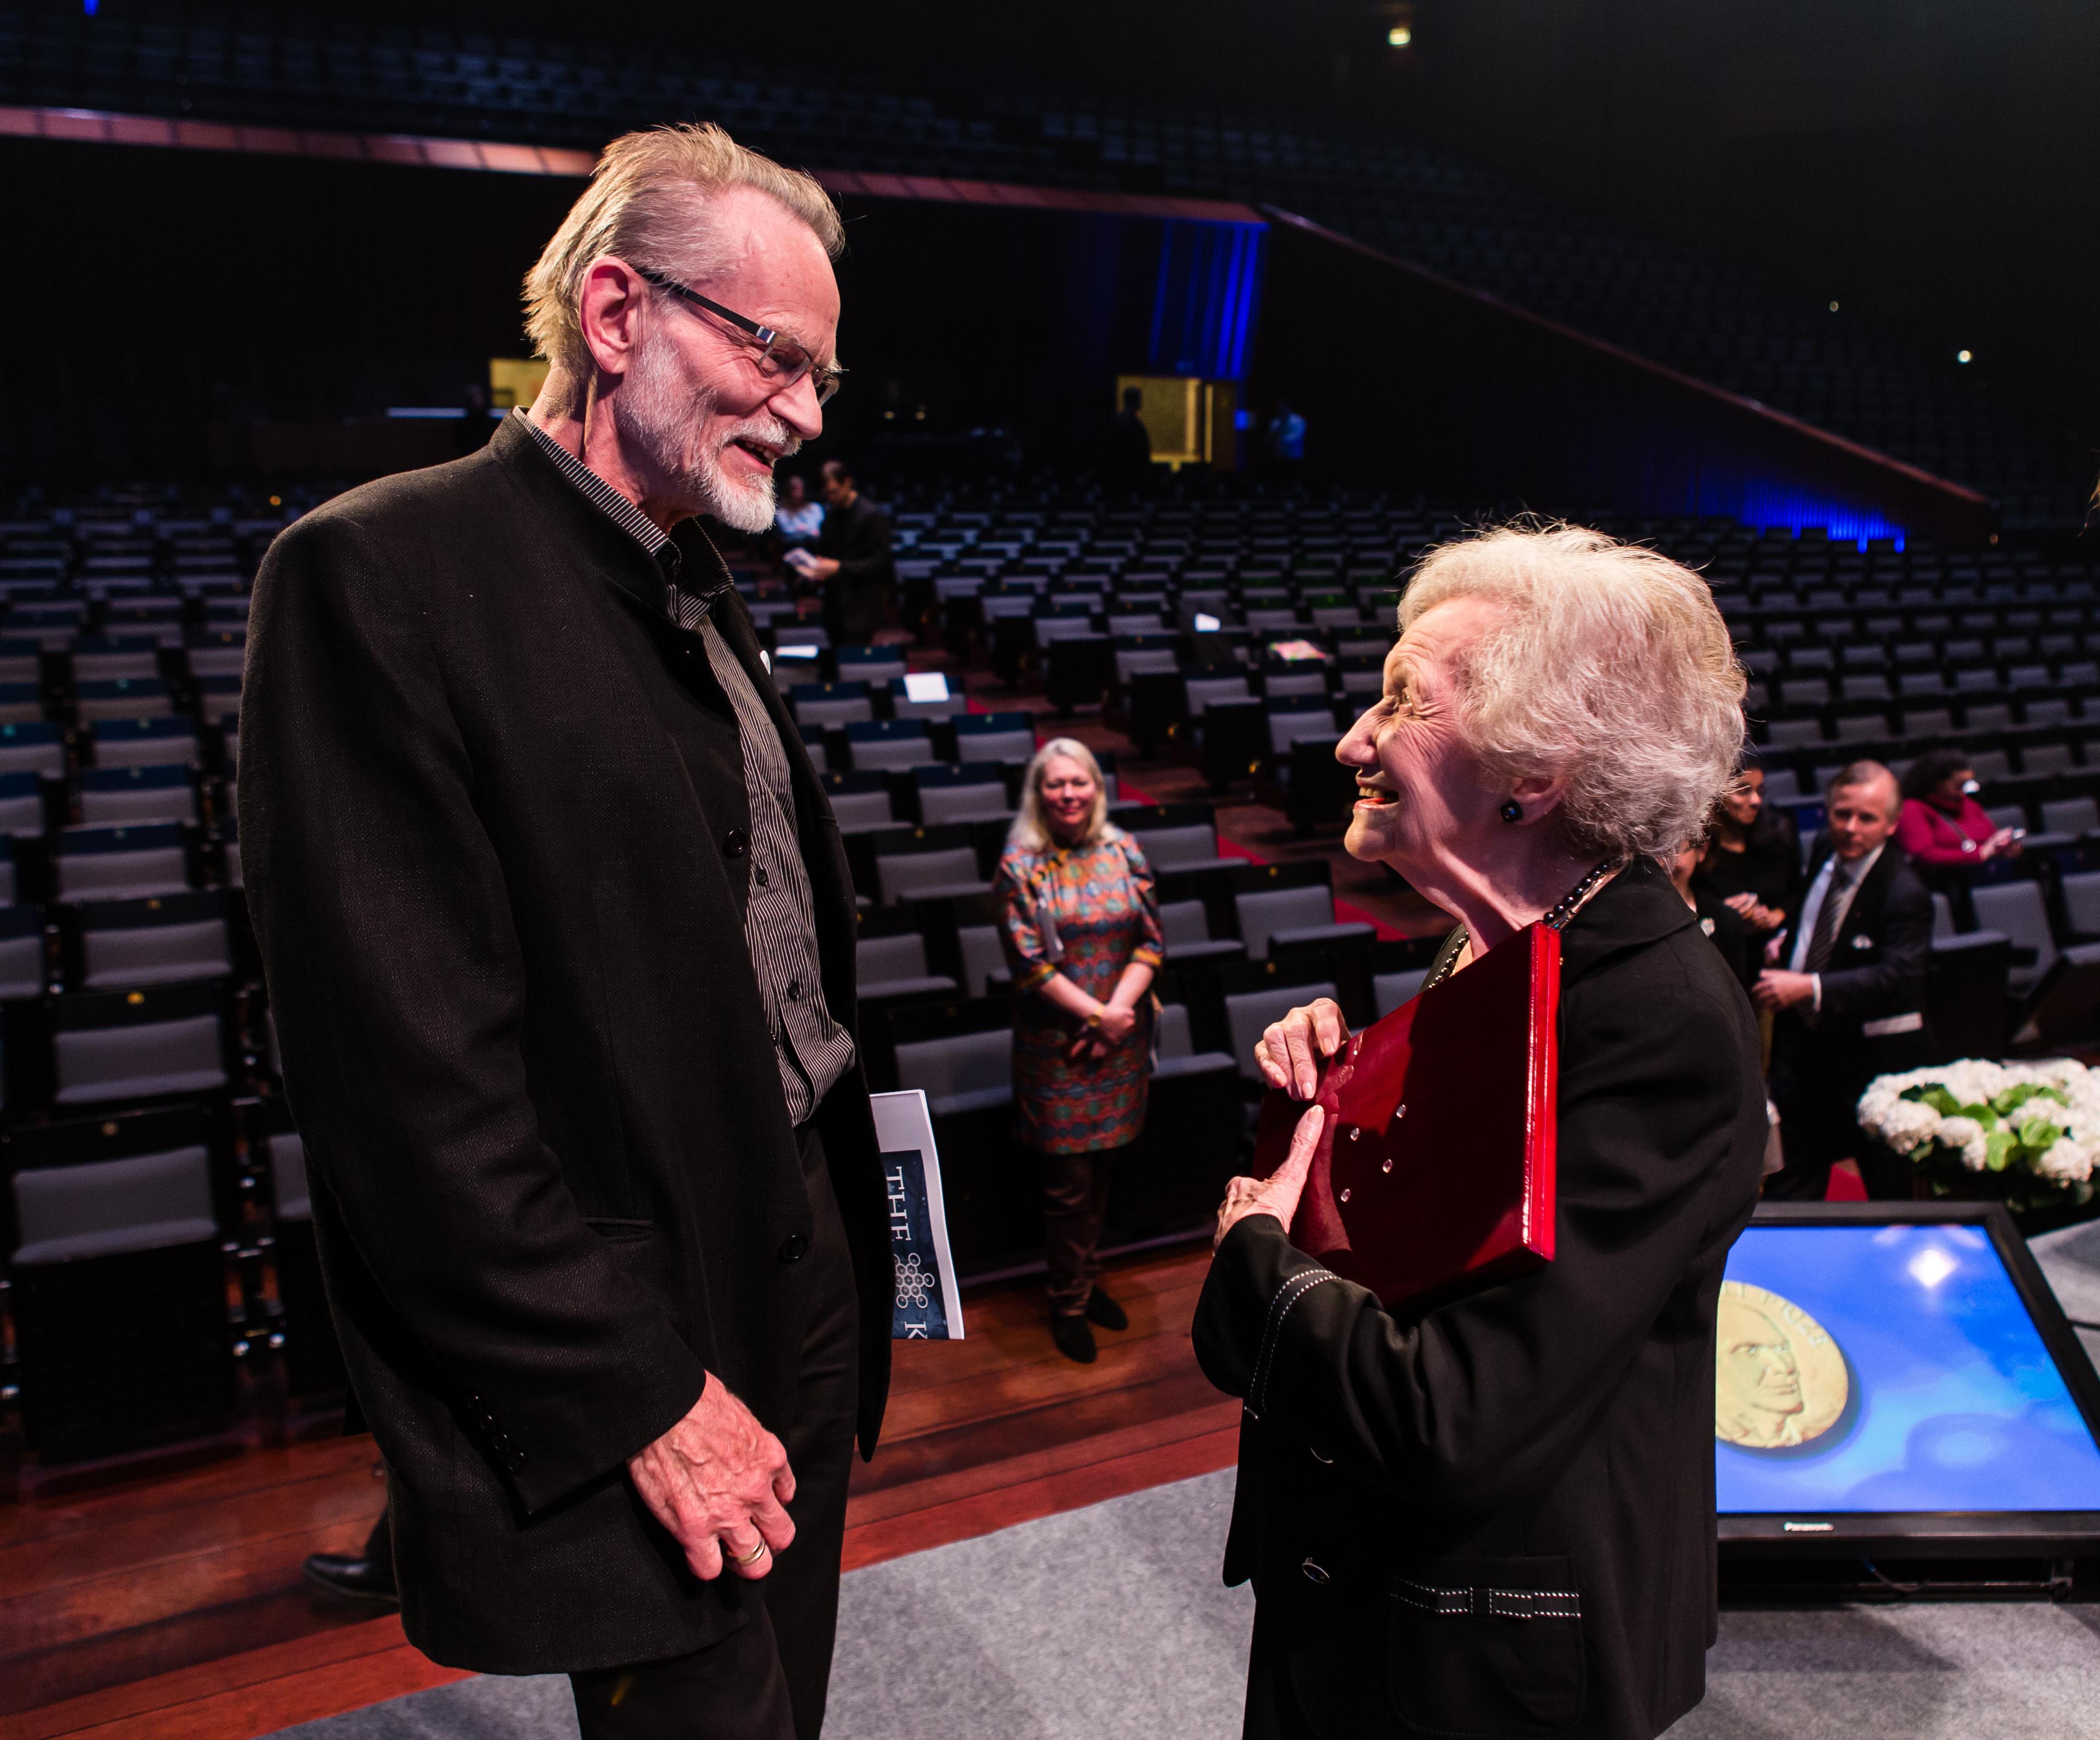 Brenda Milner in discussion with the chair of the Kavli Prize neuroscience committee 2008-2012 Jon Storm-Mathisen